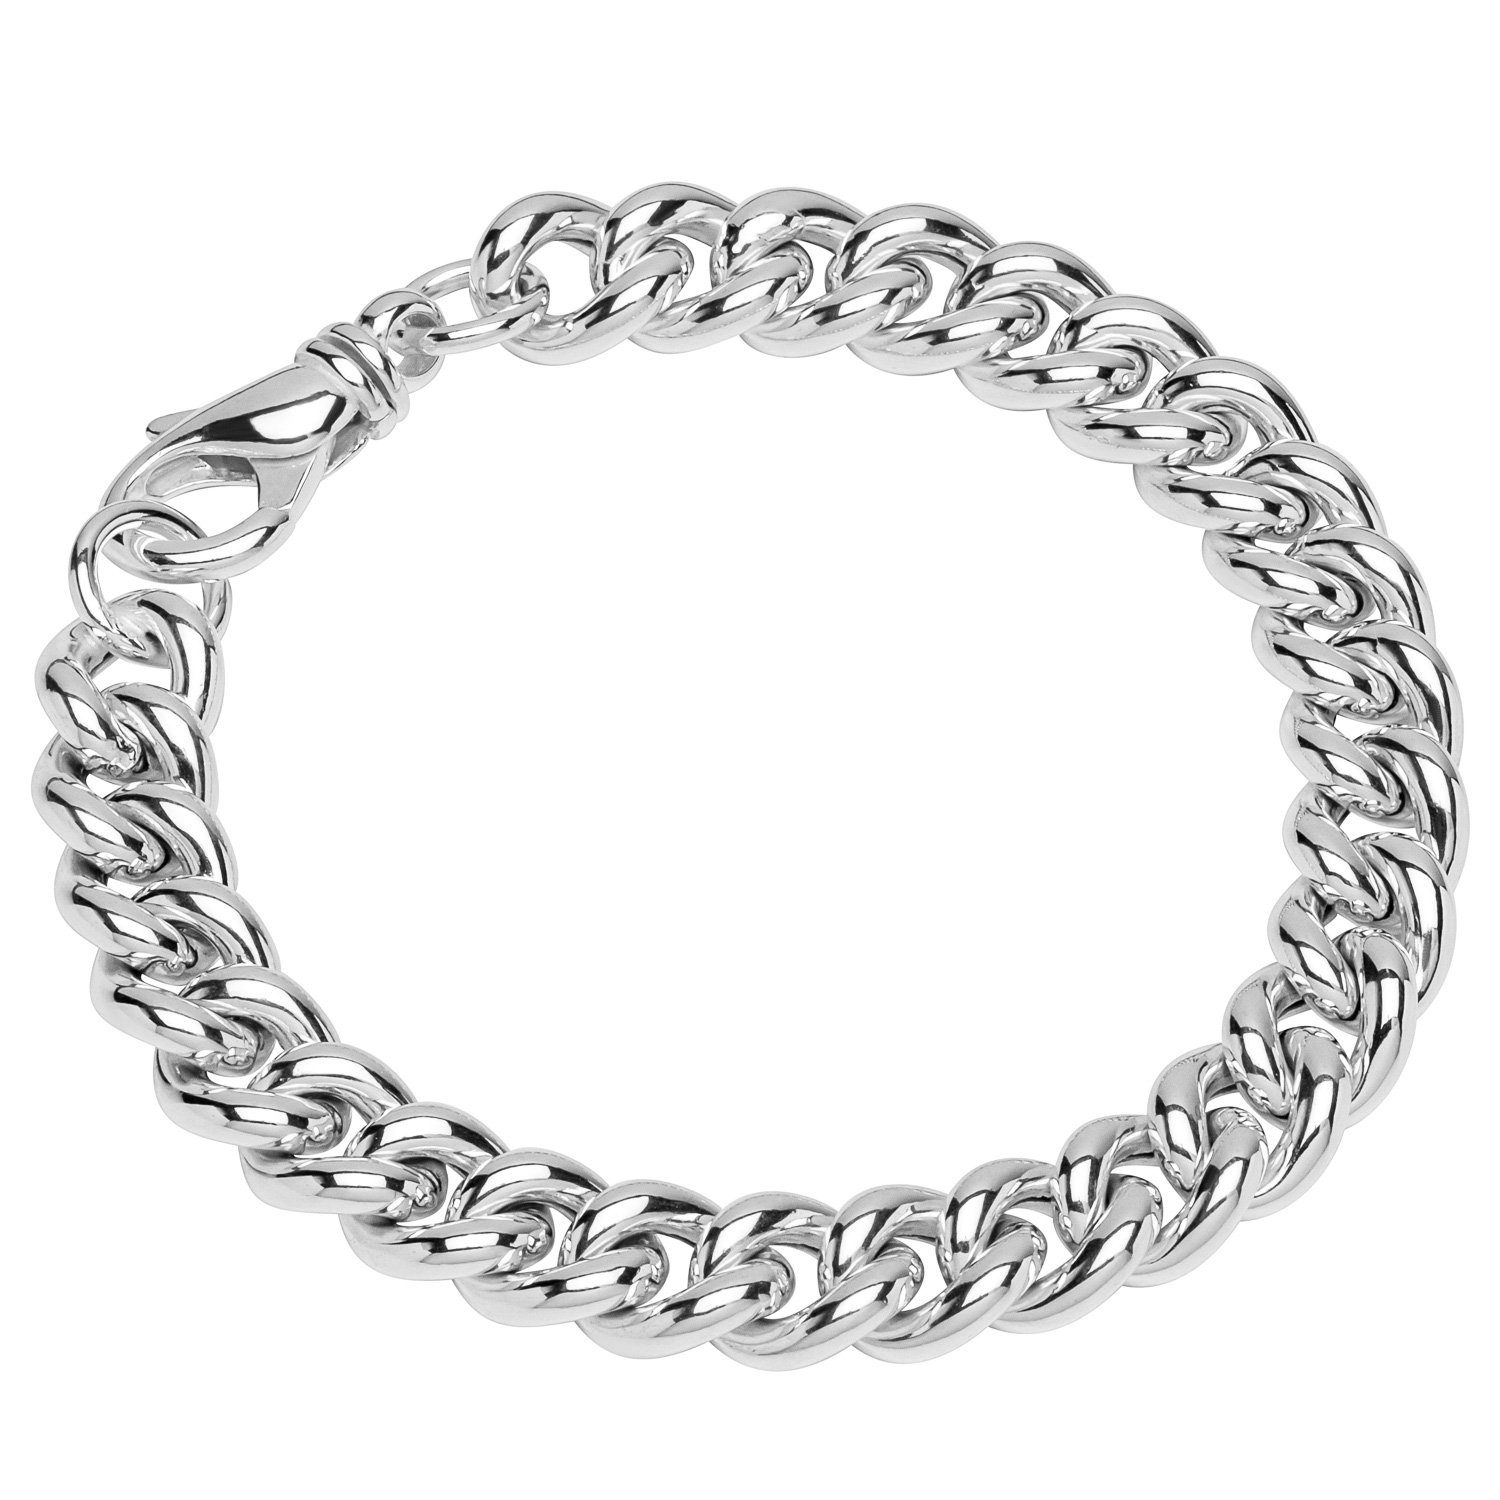 NKlaus Silberarmband Armband 925 Sterling Silber 22cm Noblesse Hohlkett (1 Stück), Made in Germany